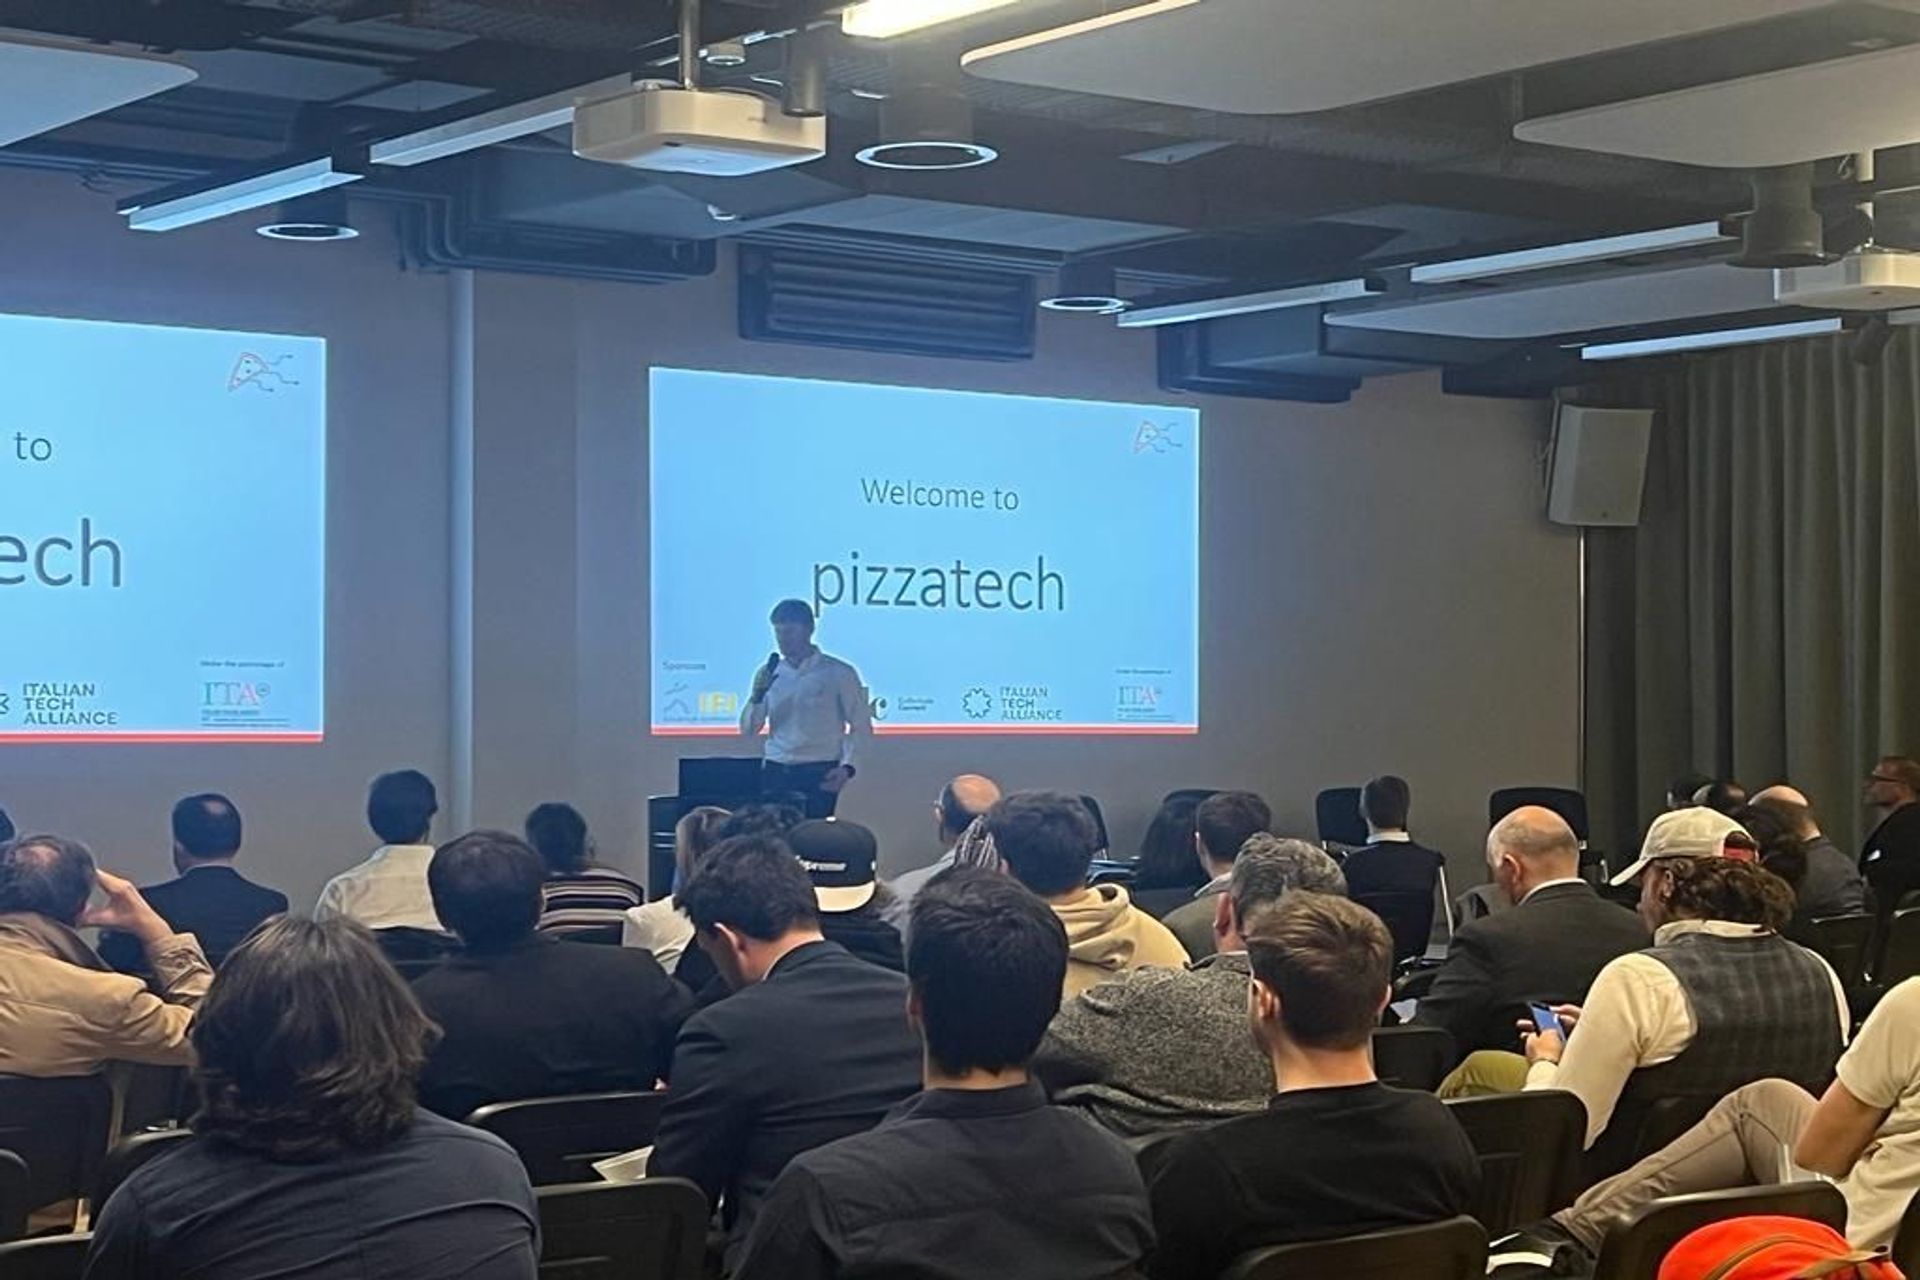 The first edition of the "Italian Tech Night", organized by the #pizzatech association, took place on the evening of 24 March 2022 at the Startup Space by IFJ in Schlieren, near Zurich: the introductory speech by the organizer Gianmaria Sbetta